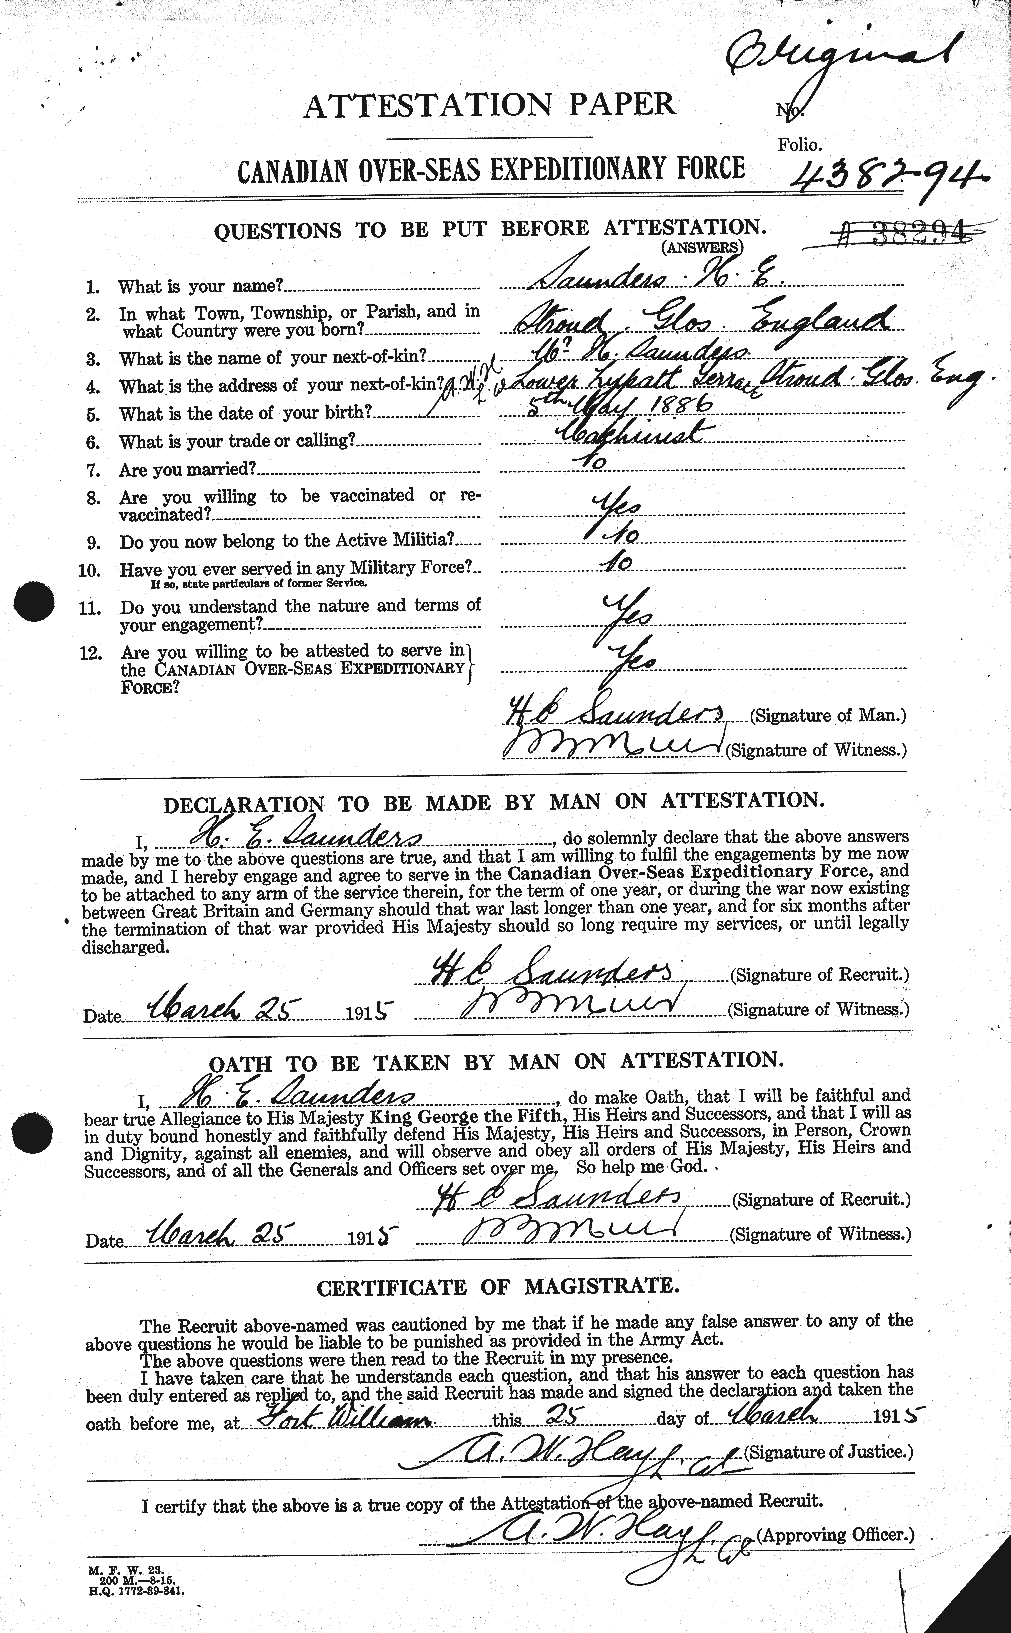 Personnel Records of the First World War - CEF 080845a